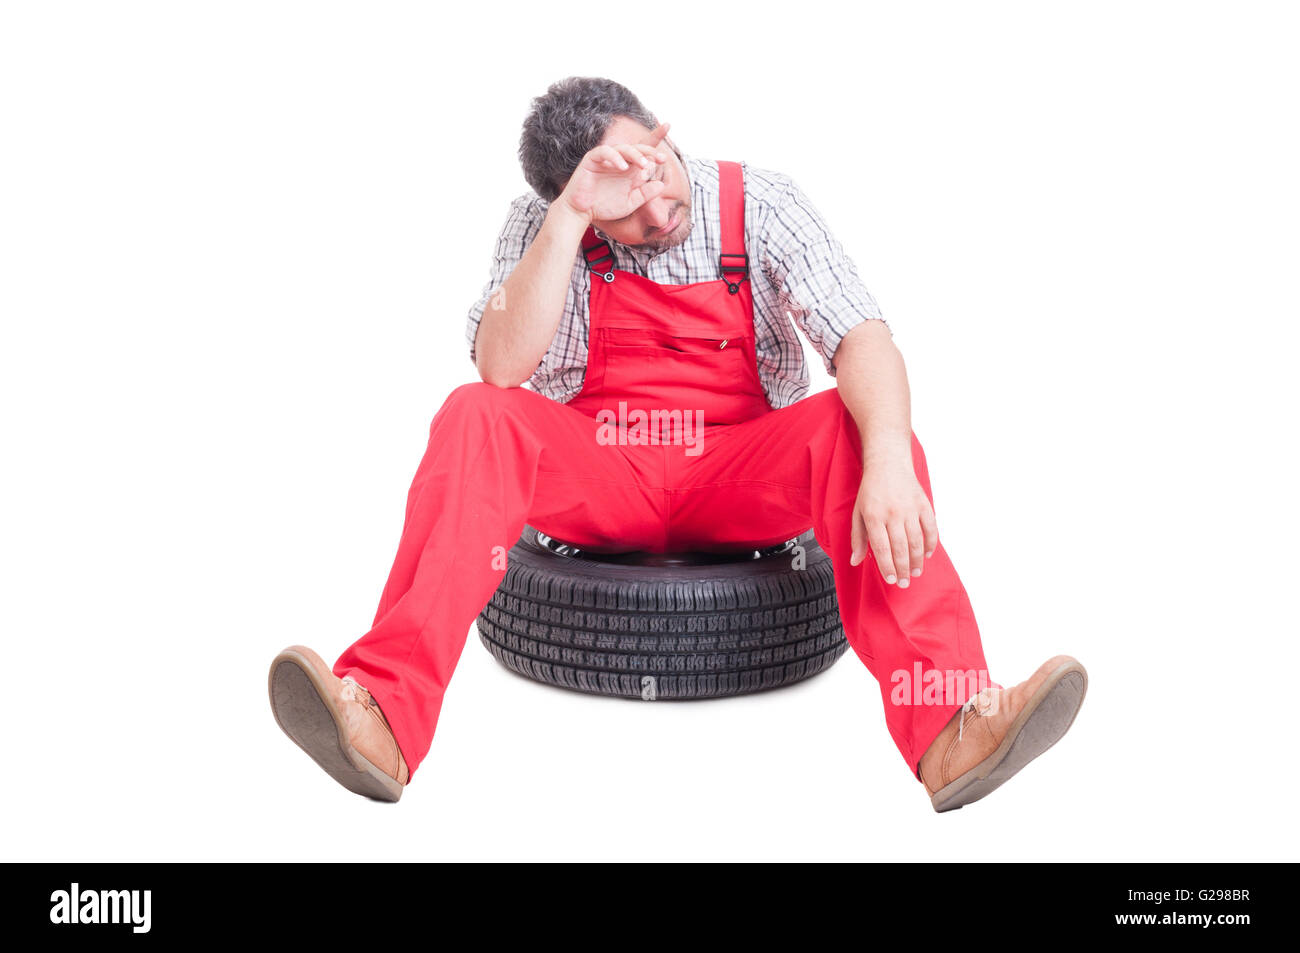 Tired and exhausted mechanic sitting on a car wheel wiping his sweaty forehead Stock Photo